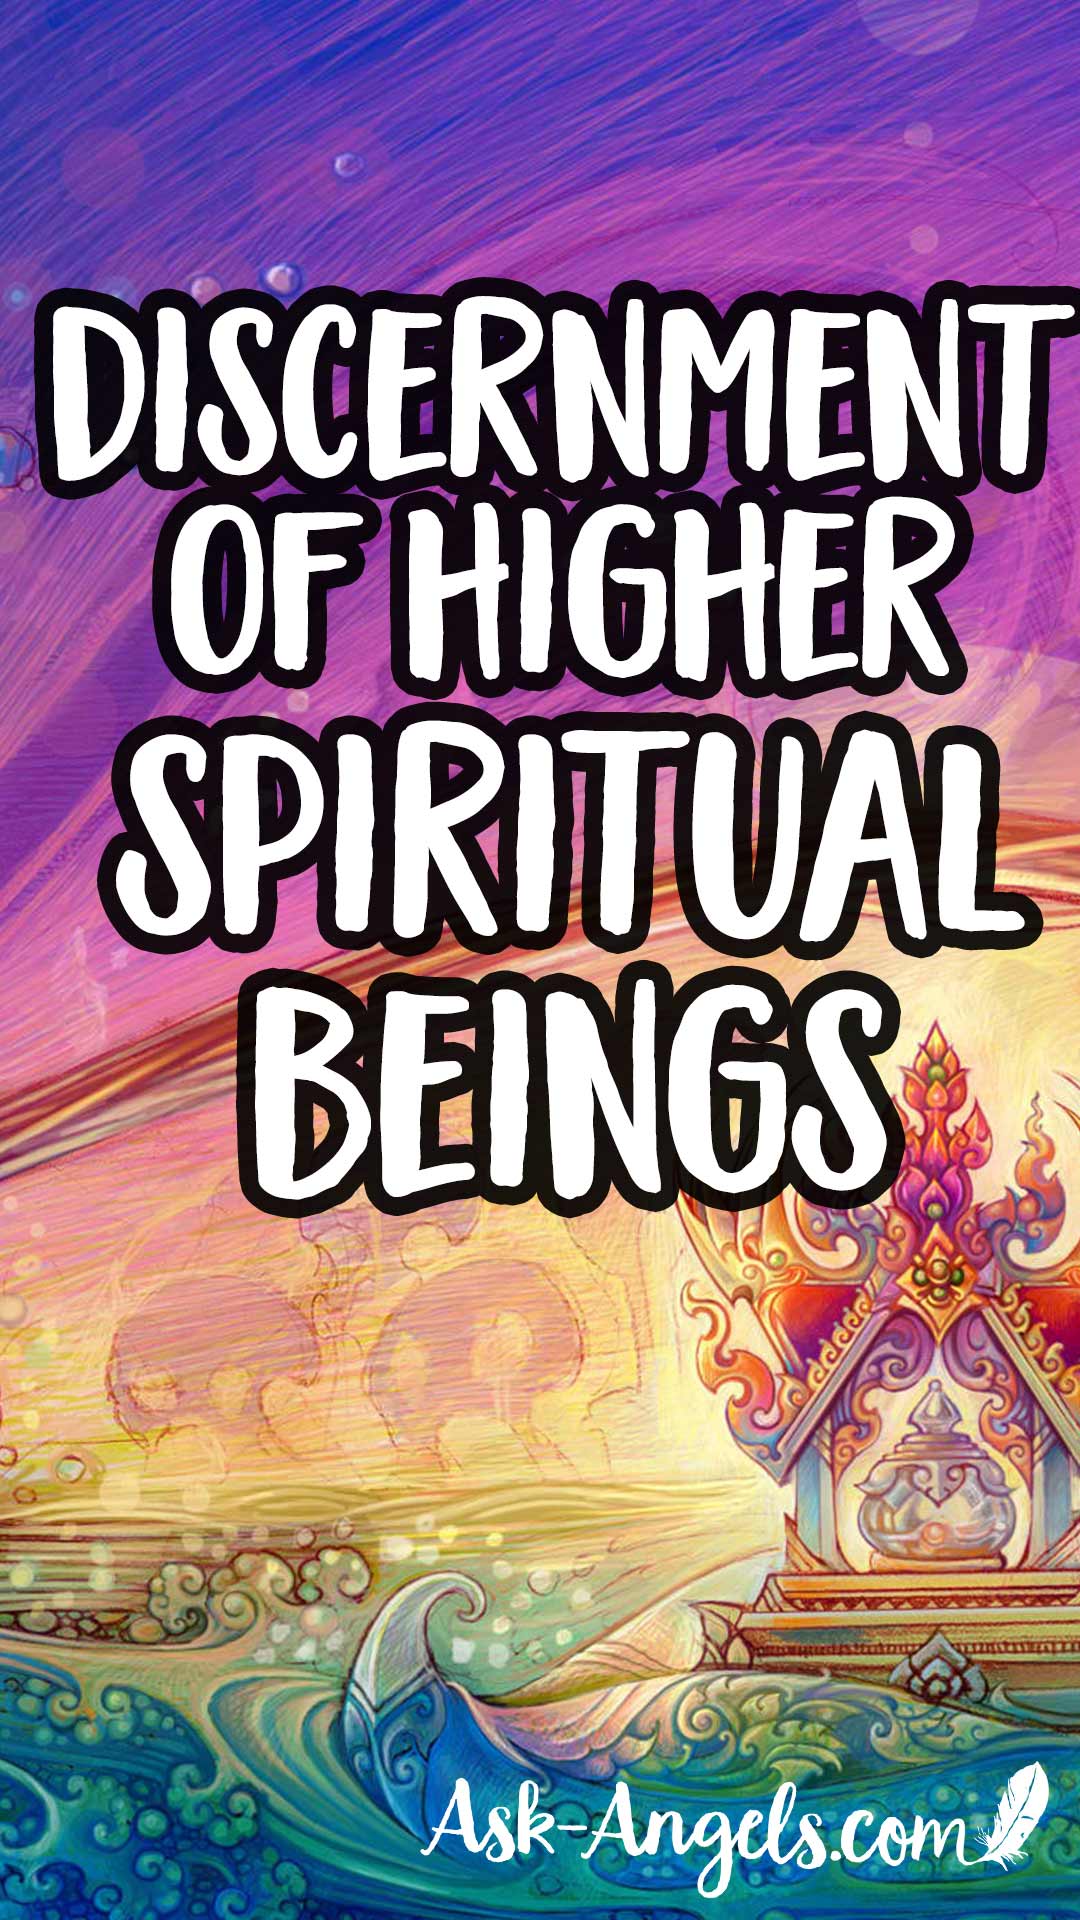 Discernment of Higher Spiritual Beings